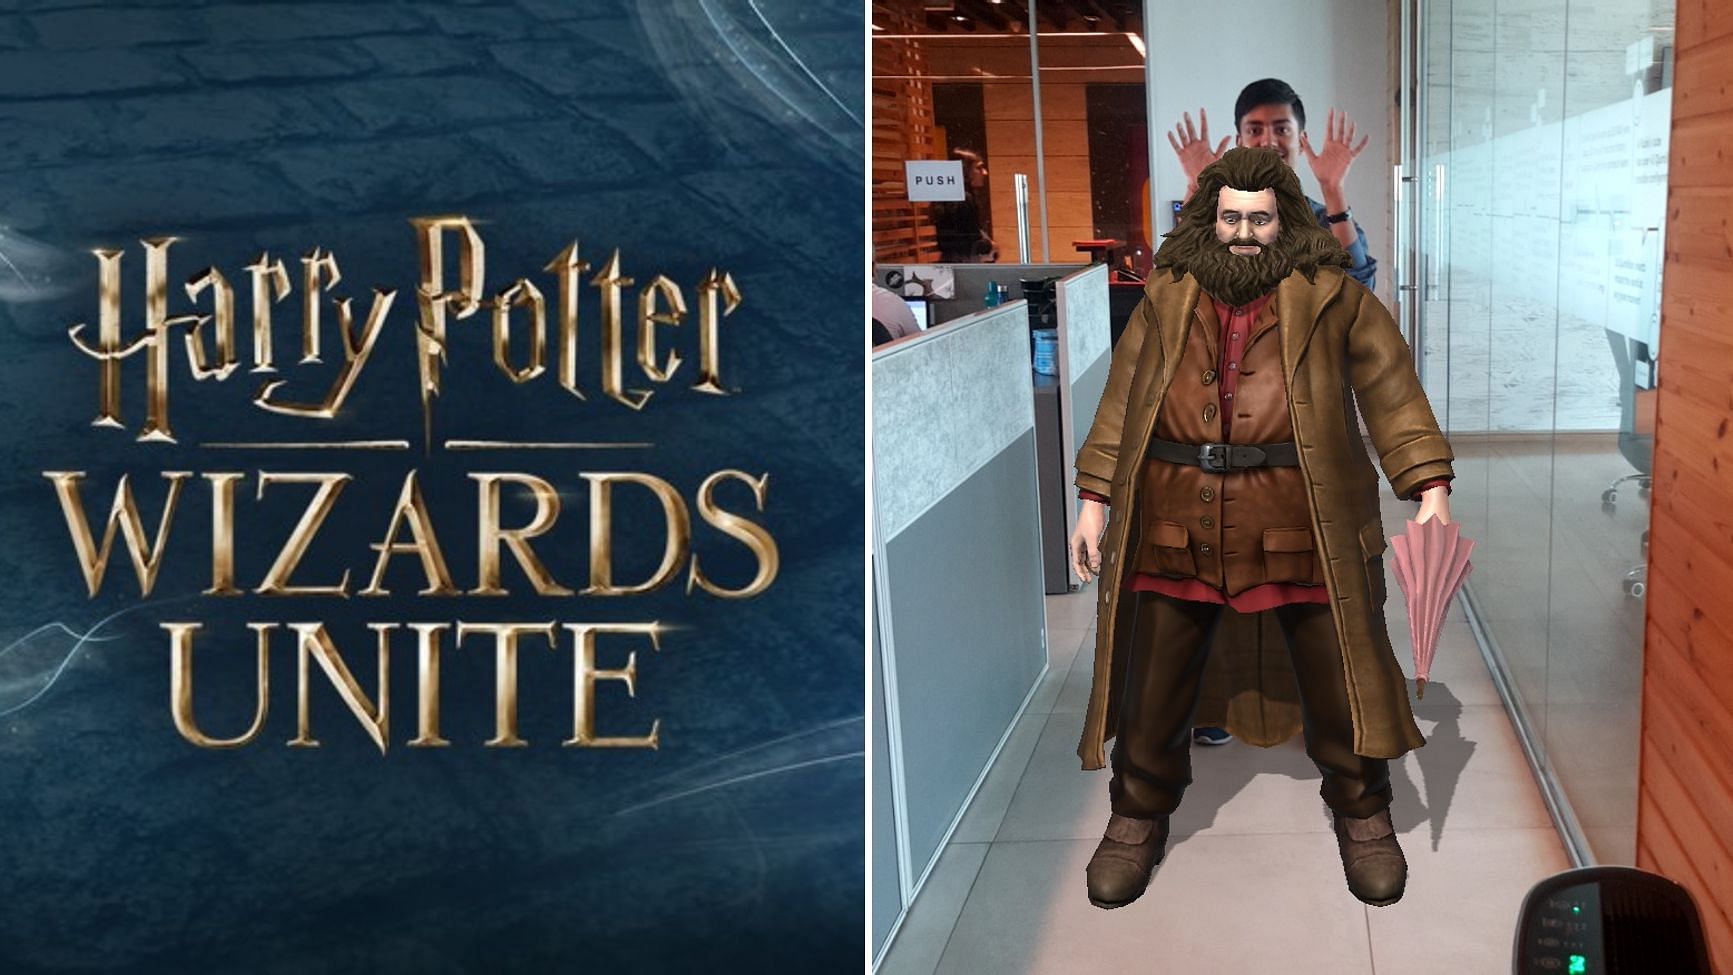 Wizards Unite brings the Harry Potter universe to mobile with augmented reality.